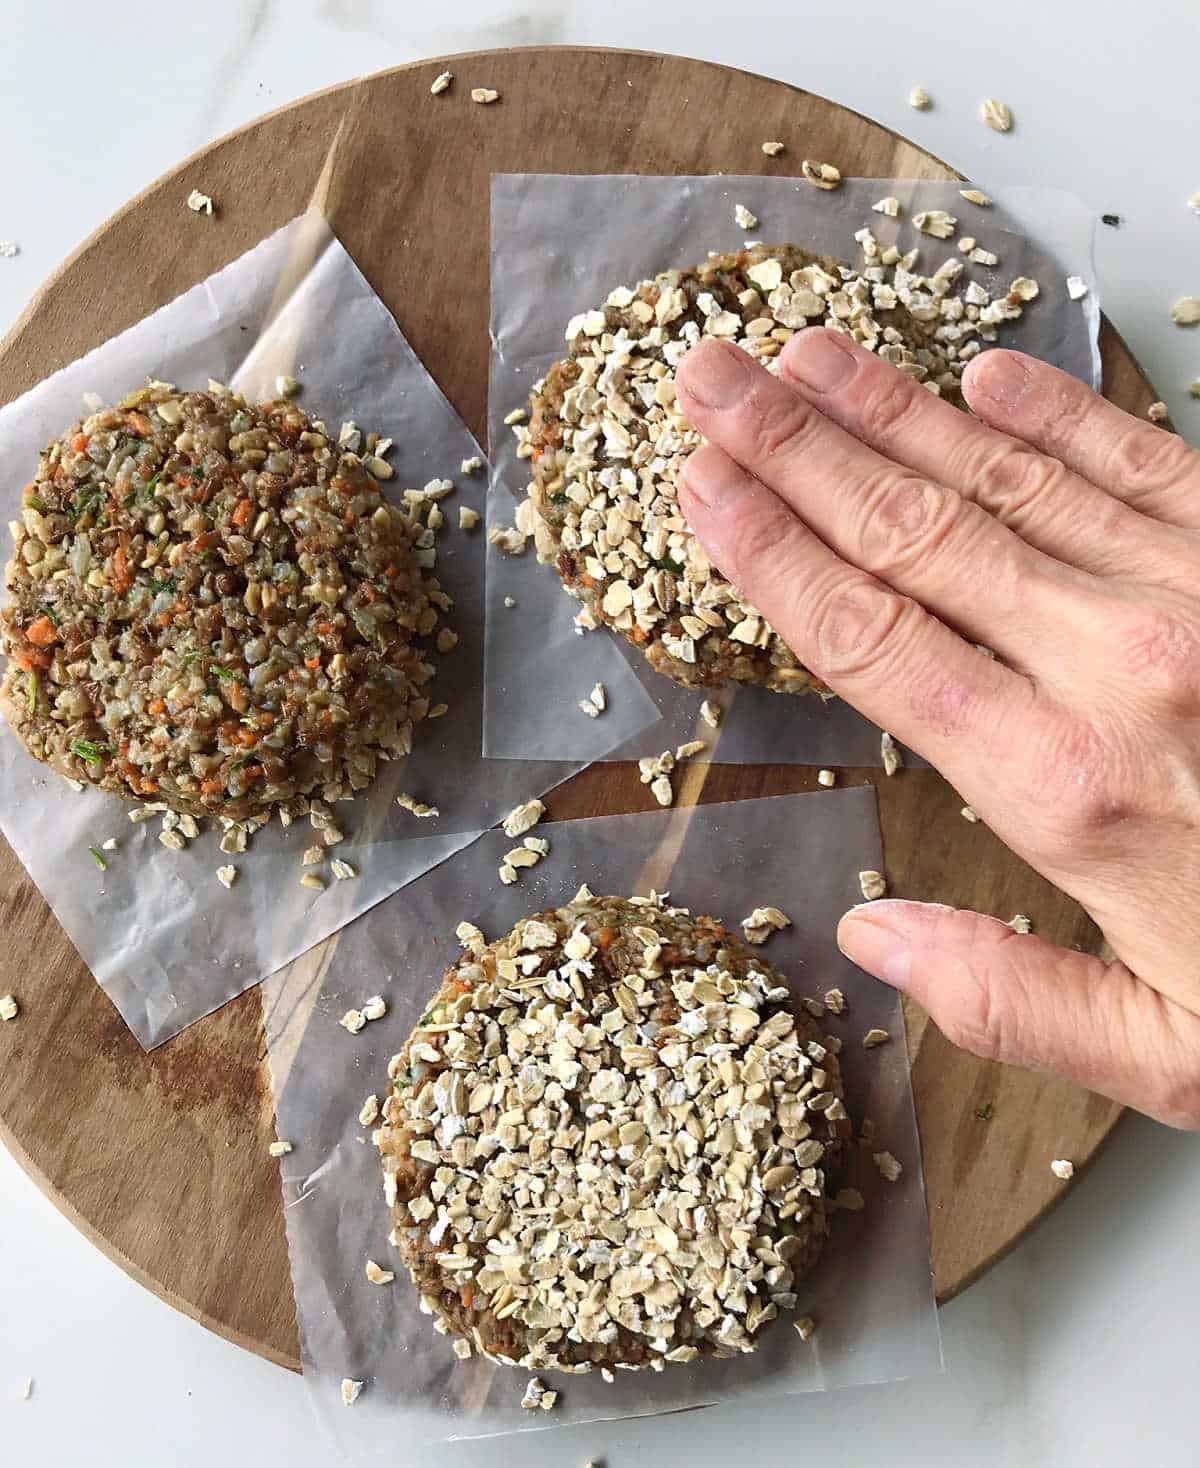 Hand pressing oats onto veggie burgers on a round wooden board